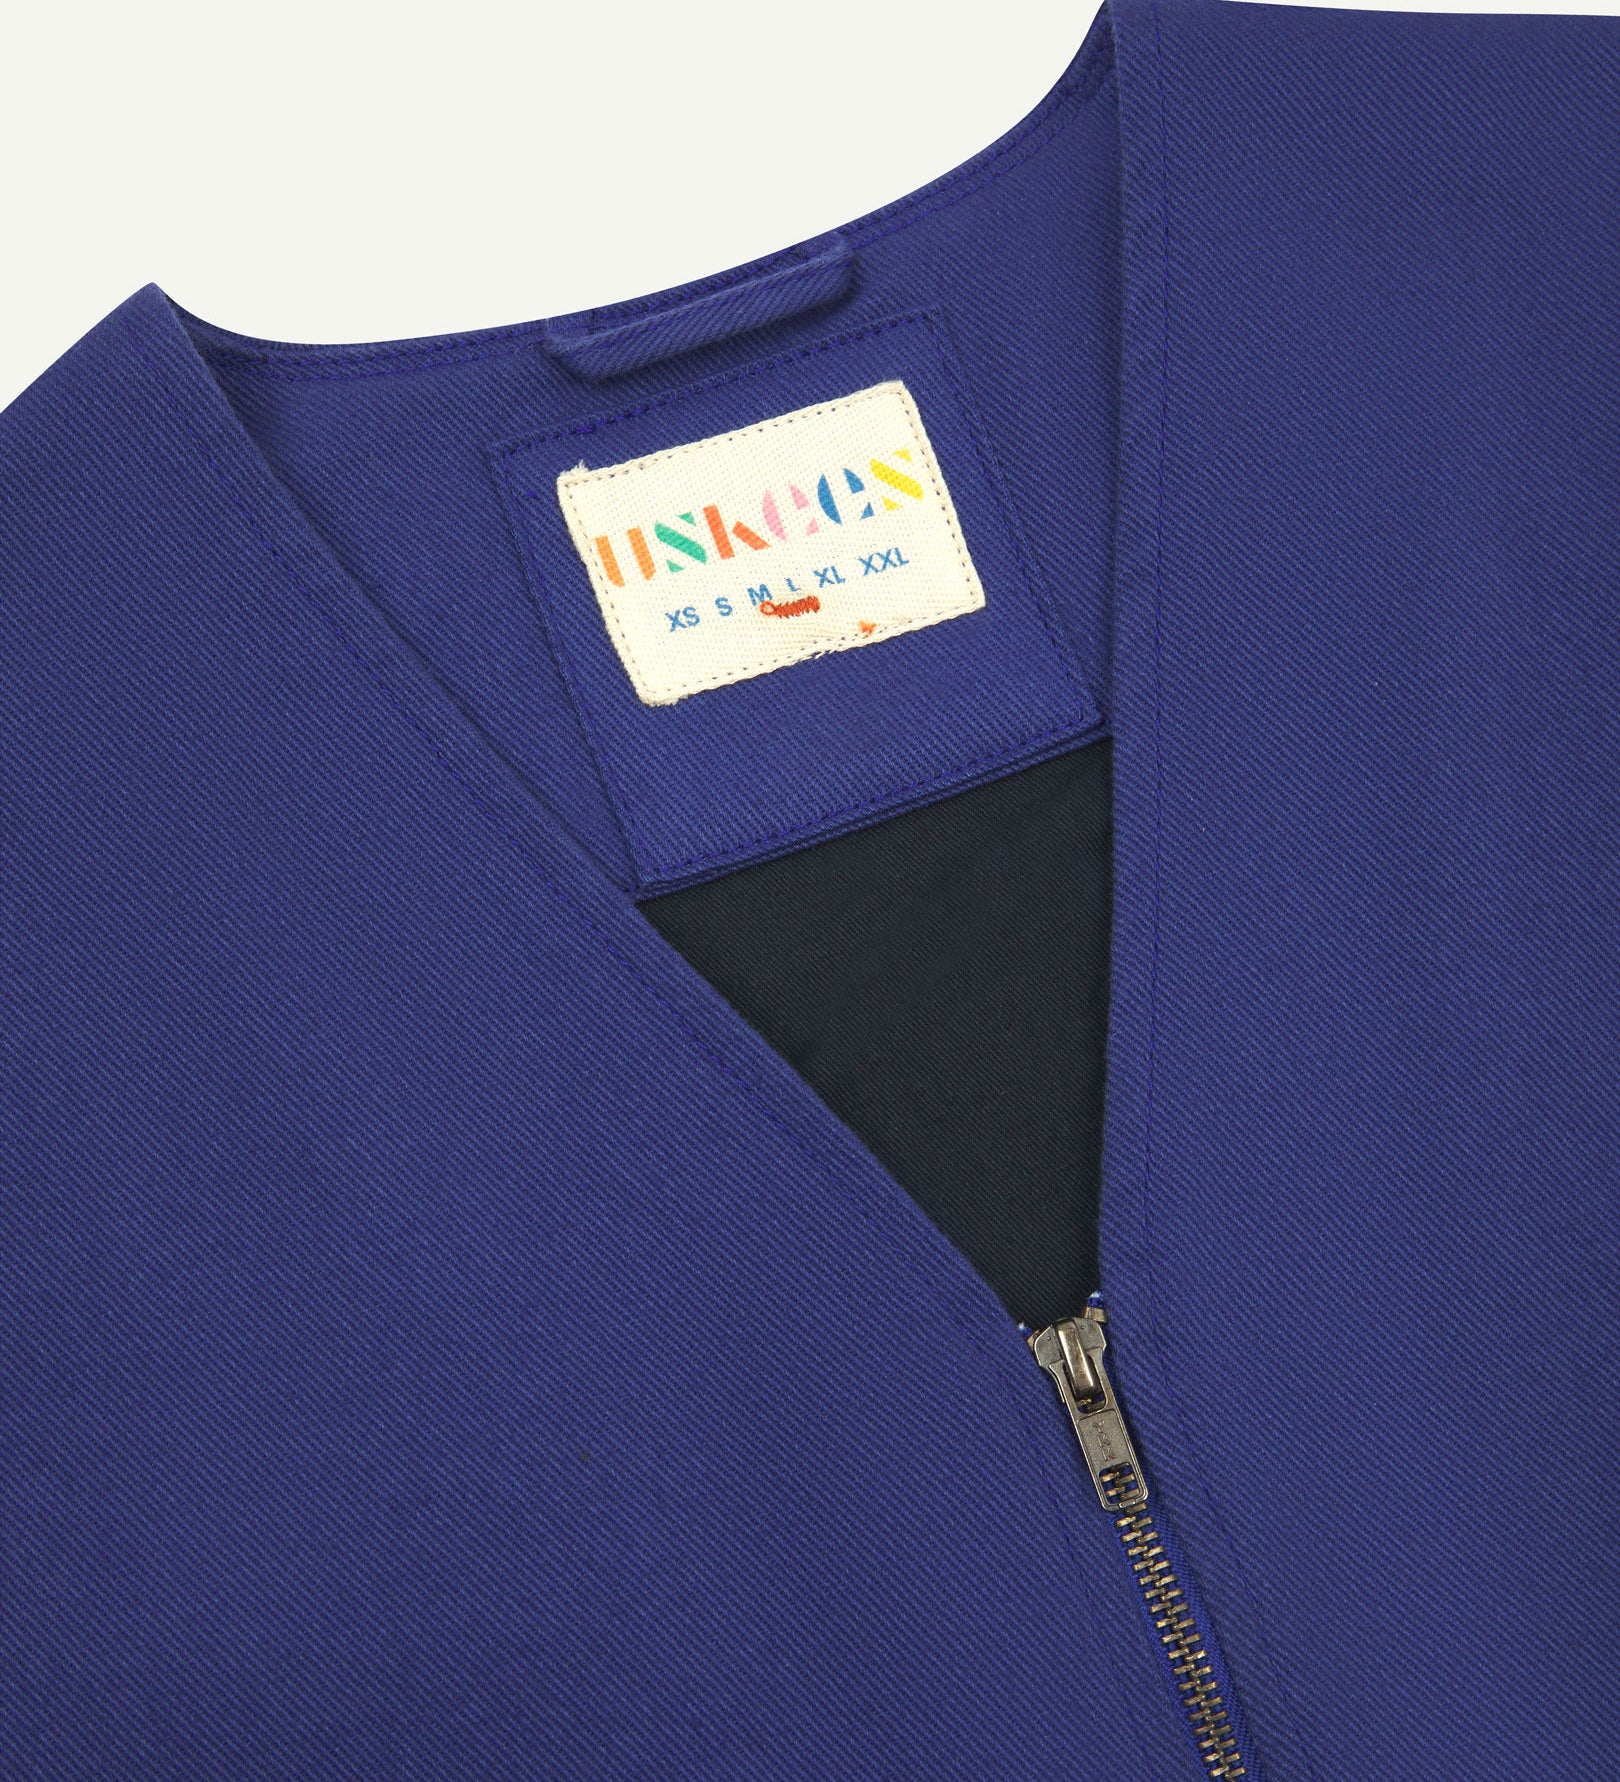 Close-up top-half view of #3036 ultra blue organic cotton-drill vest. With focus on v-neck, contrasting black lining and Uskees branding label.